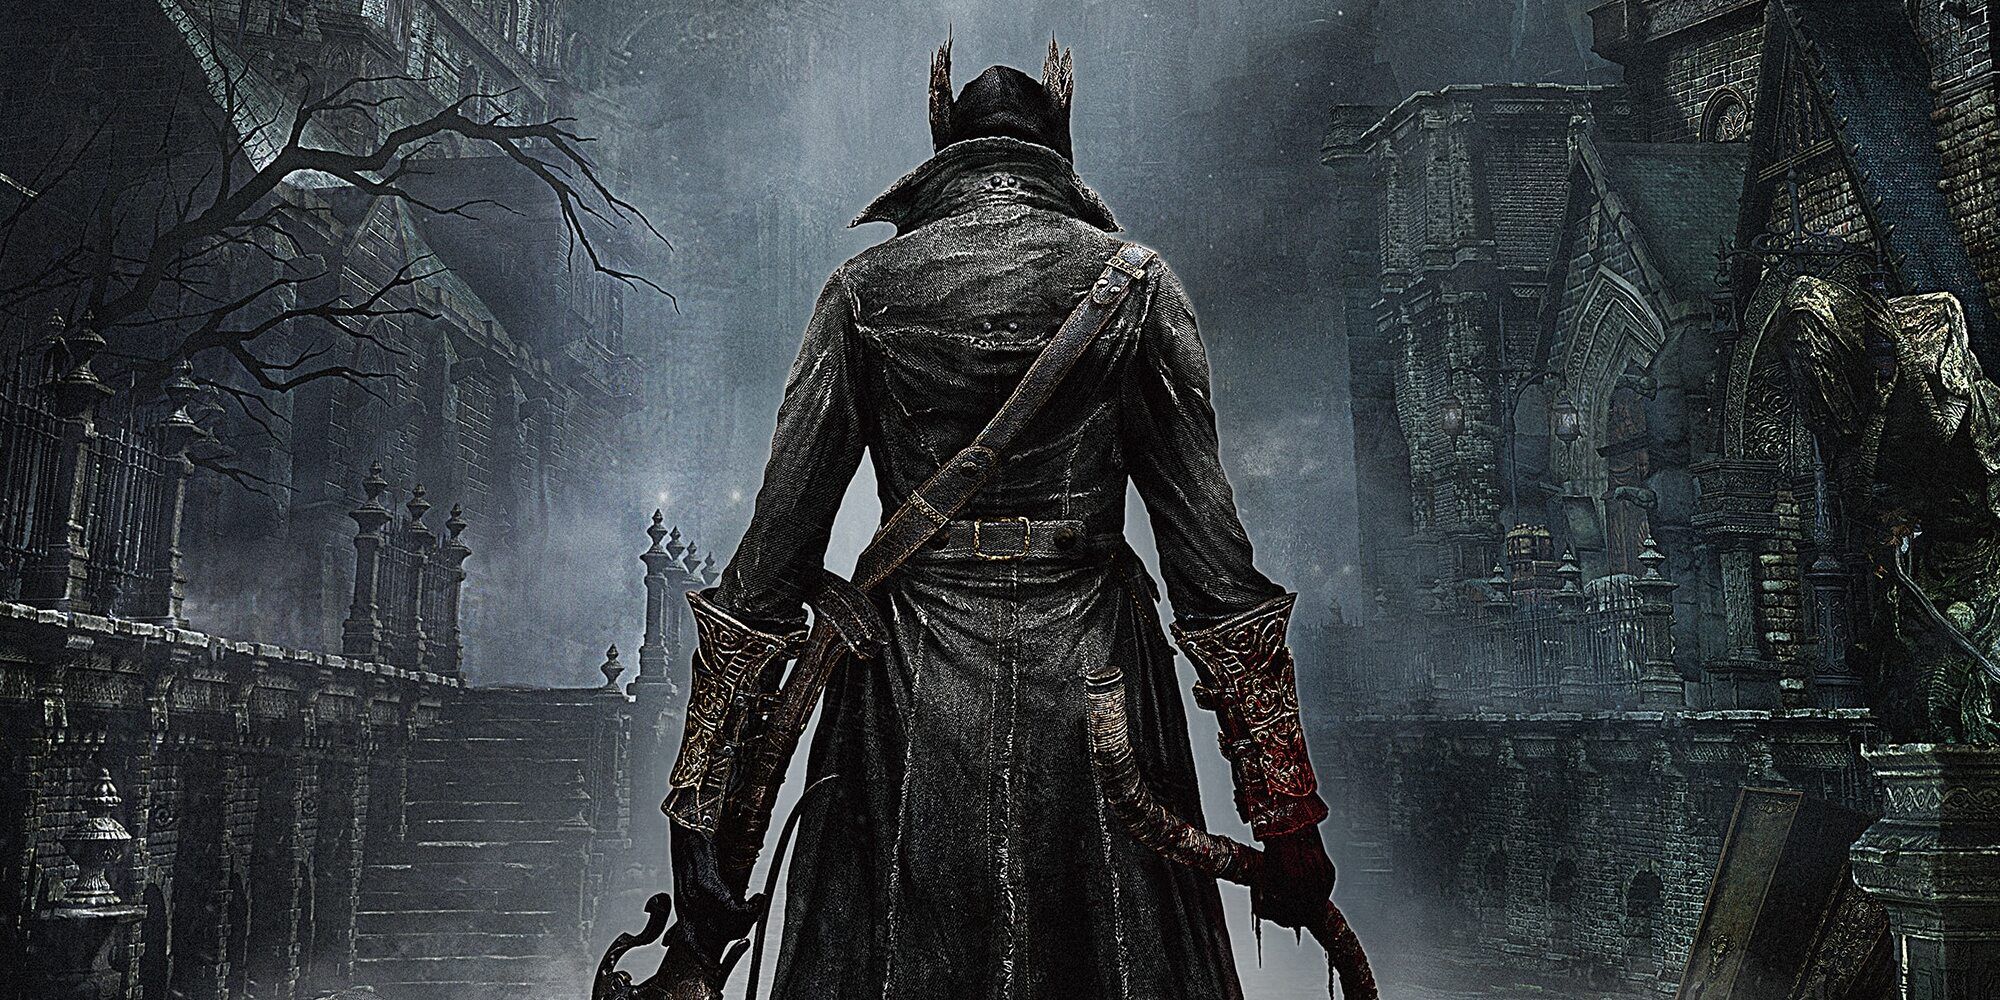 A Bloodborne Character stands with his back to the camera and surveys the foggy streets